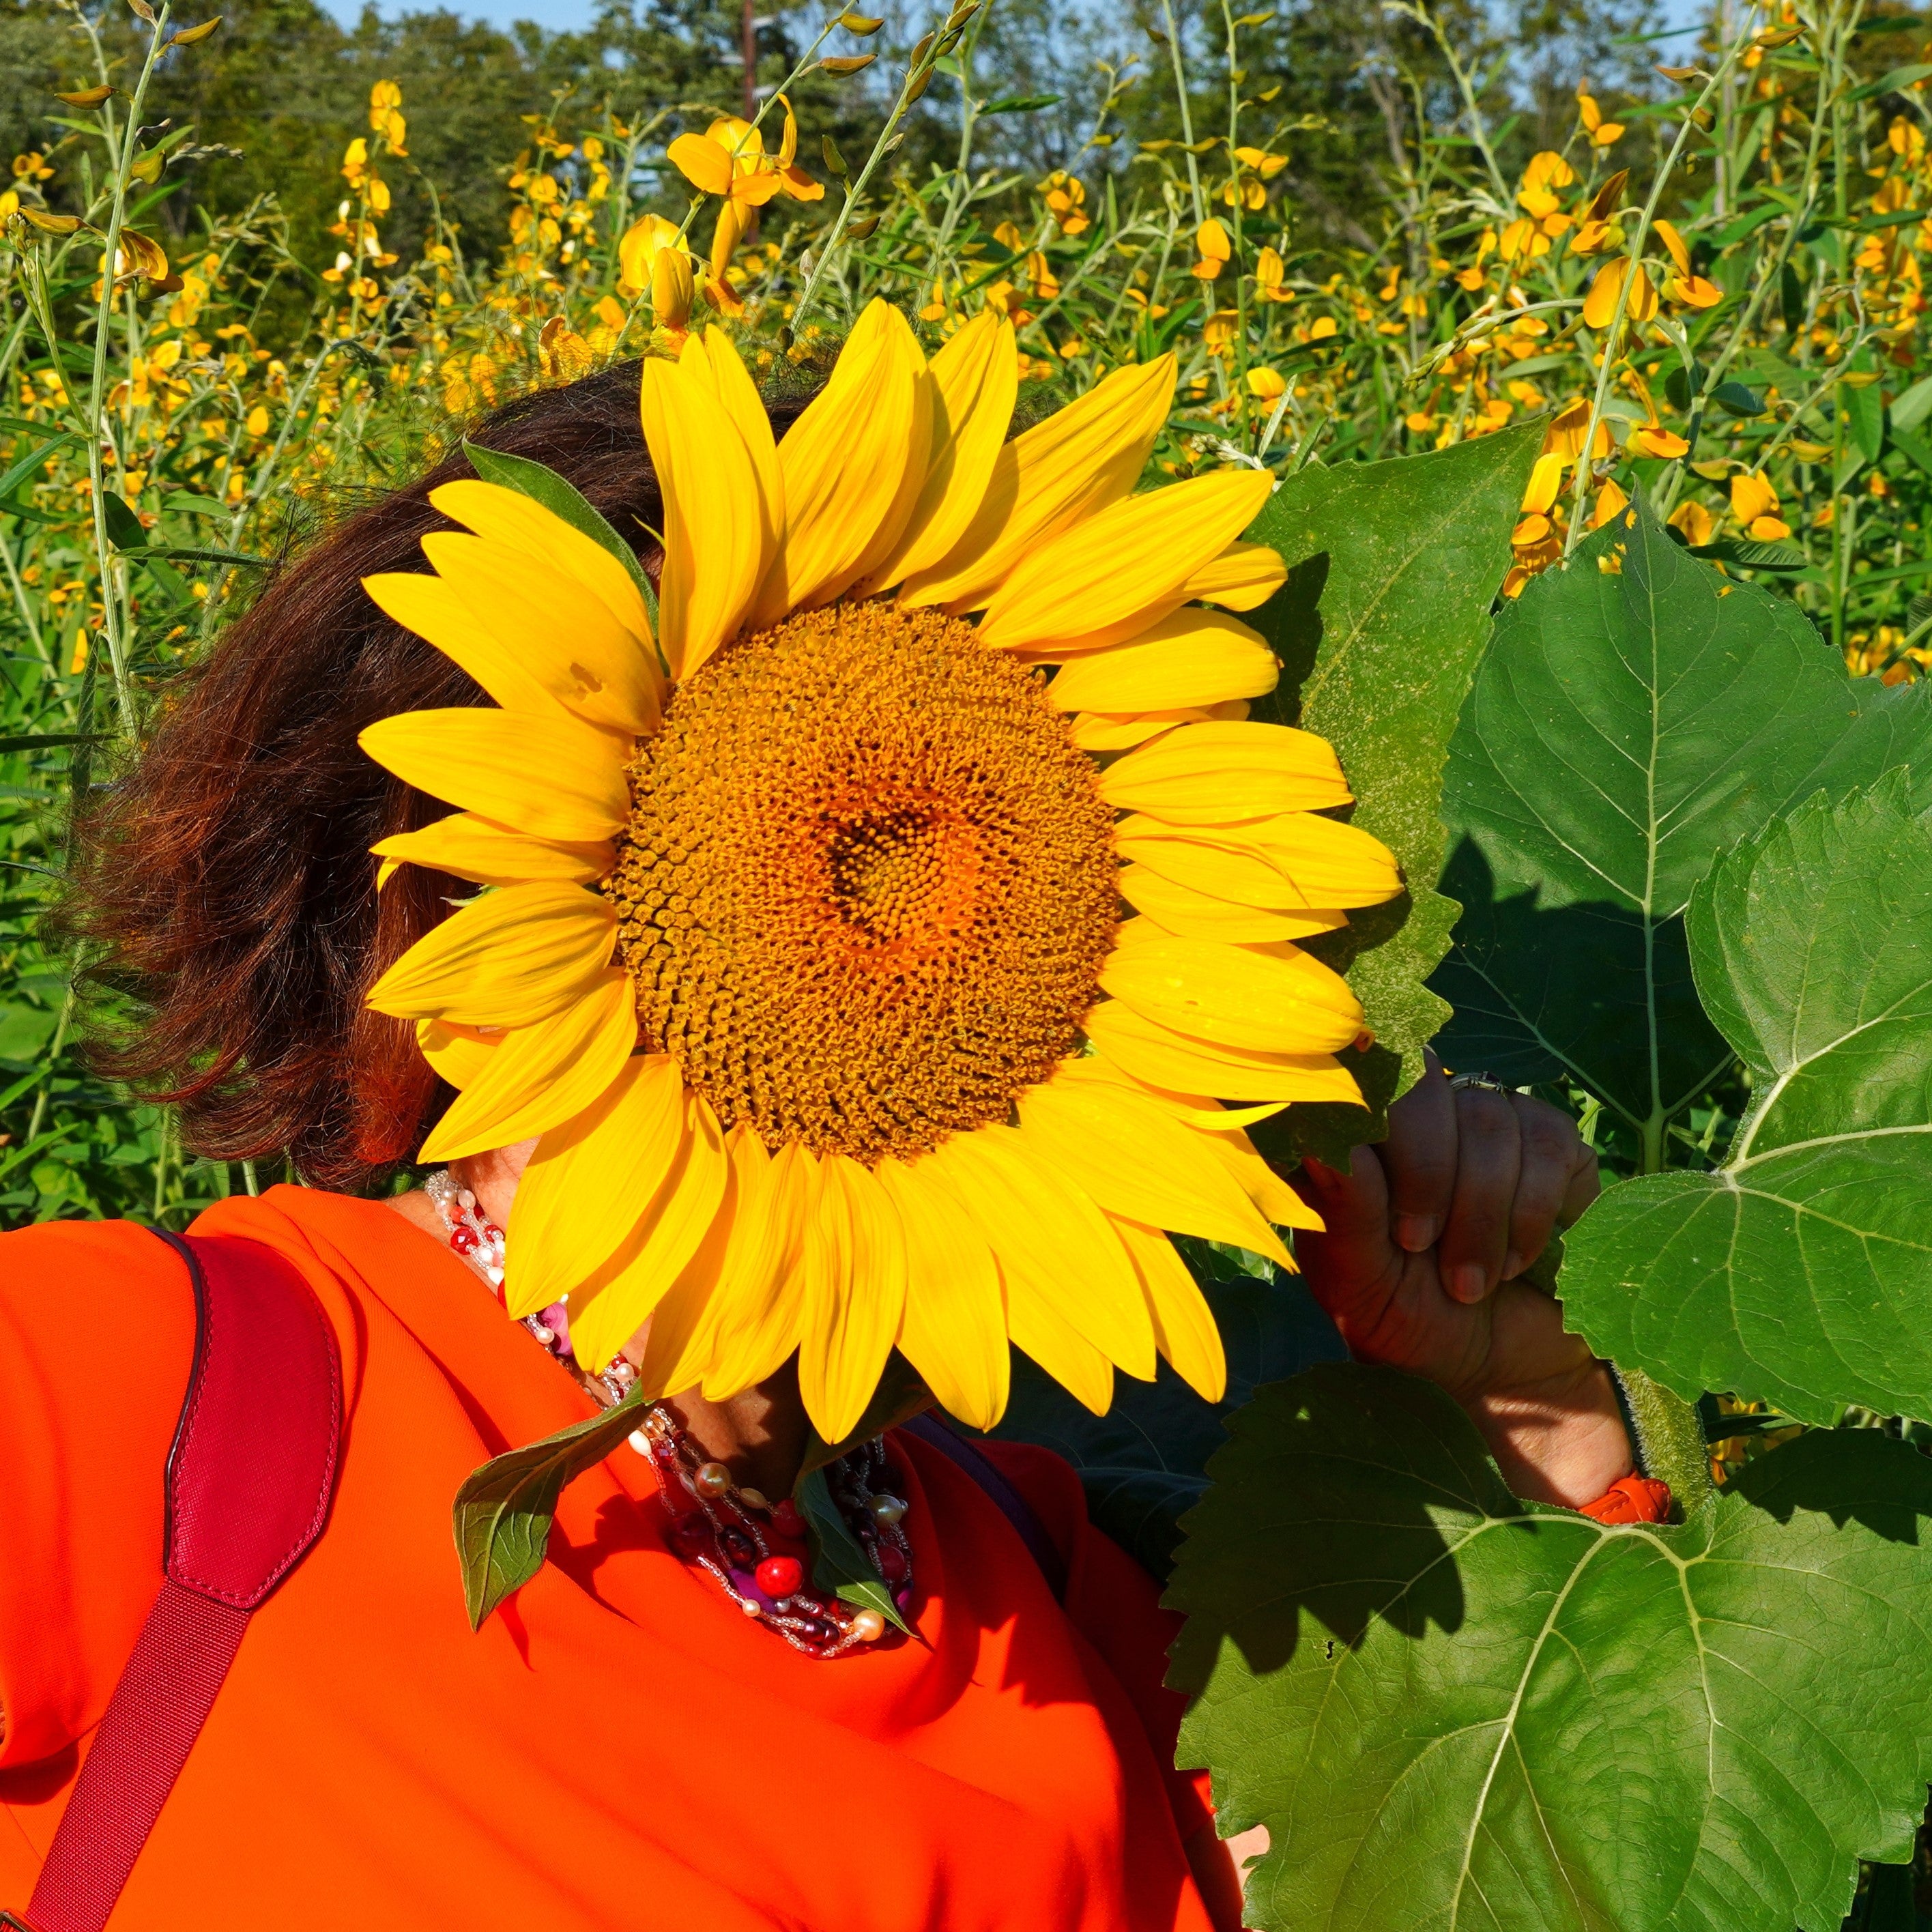 Person wearing orange obscured by large sunflower